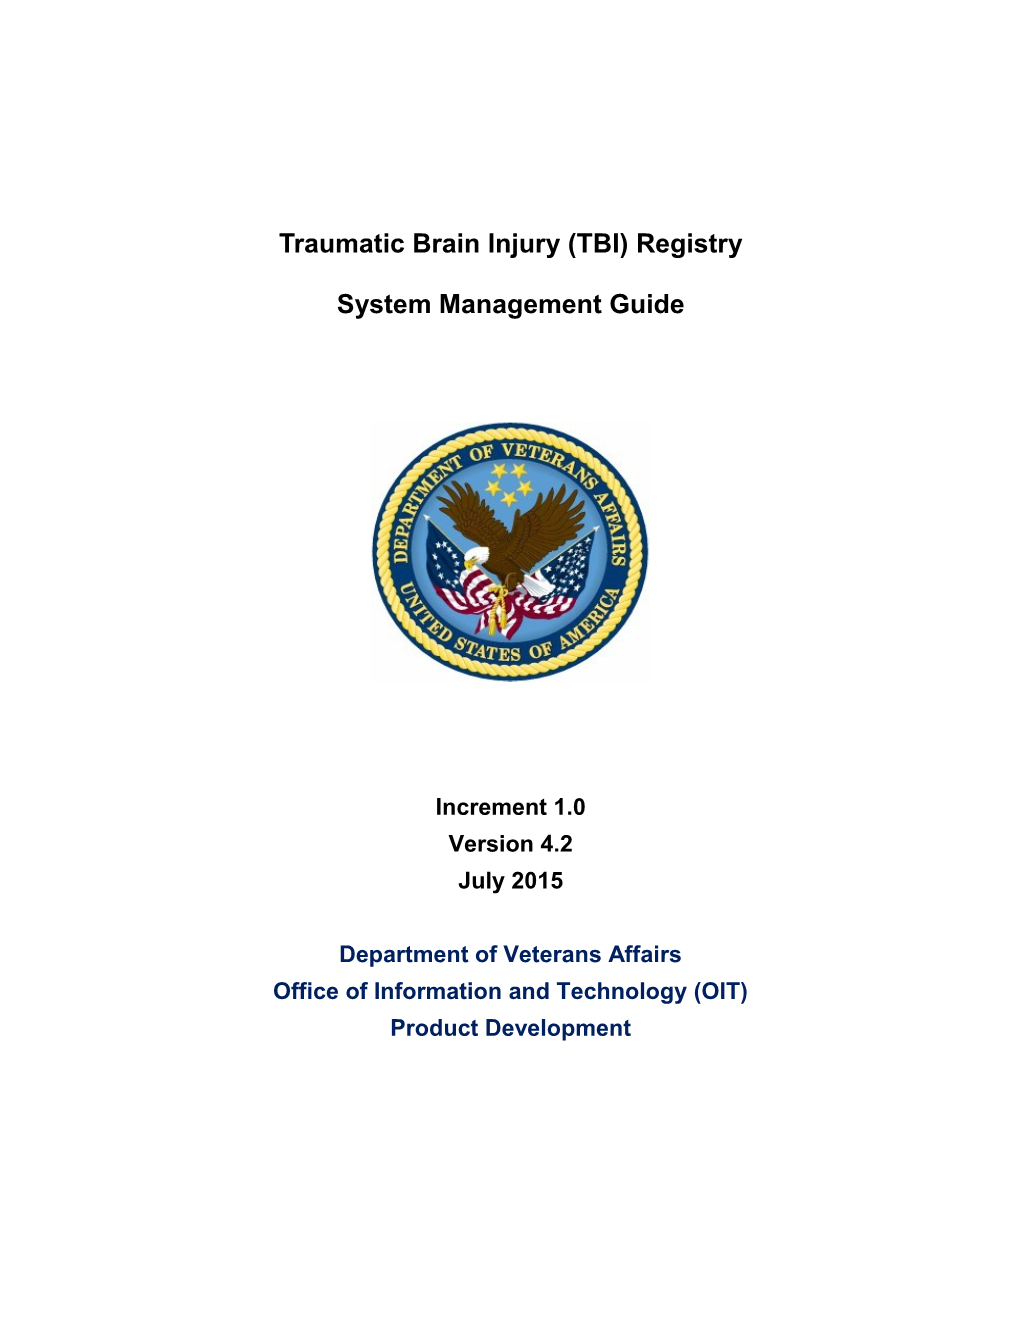 TBI System Management Guide for Increment 6